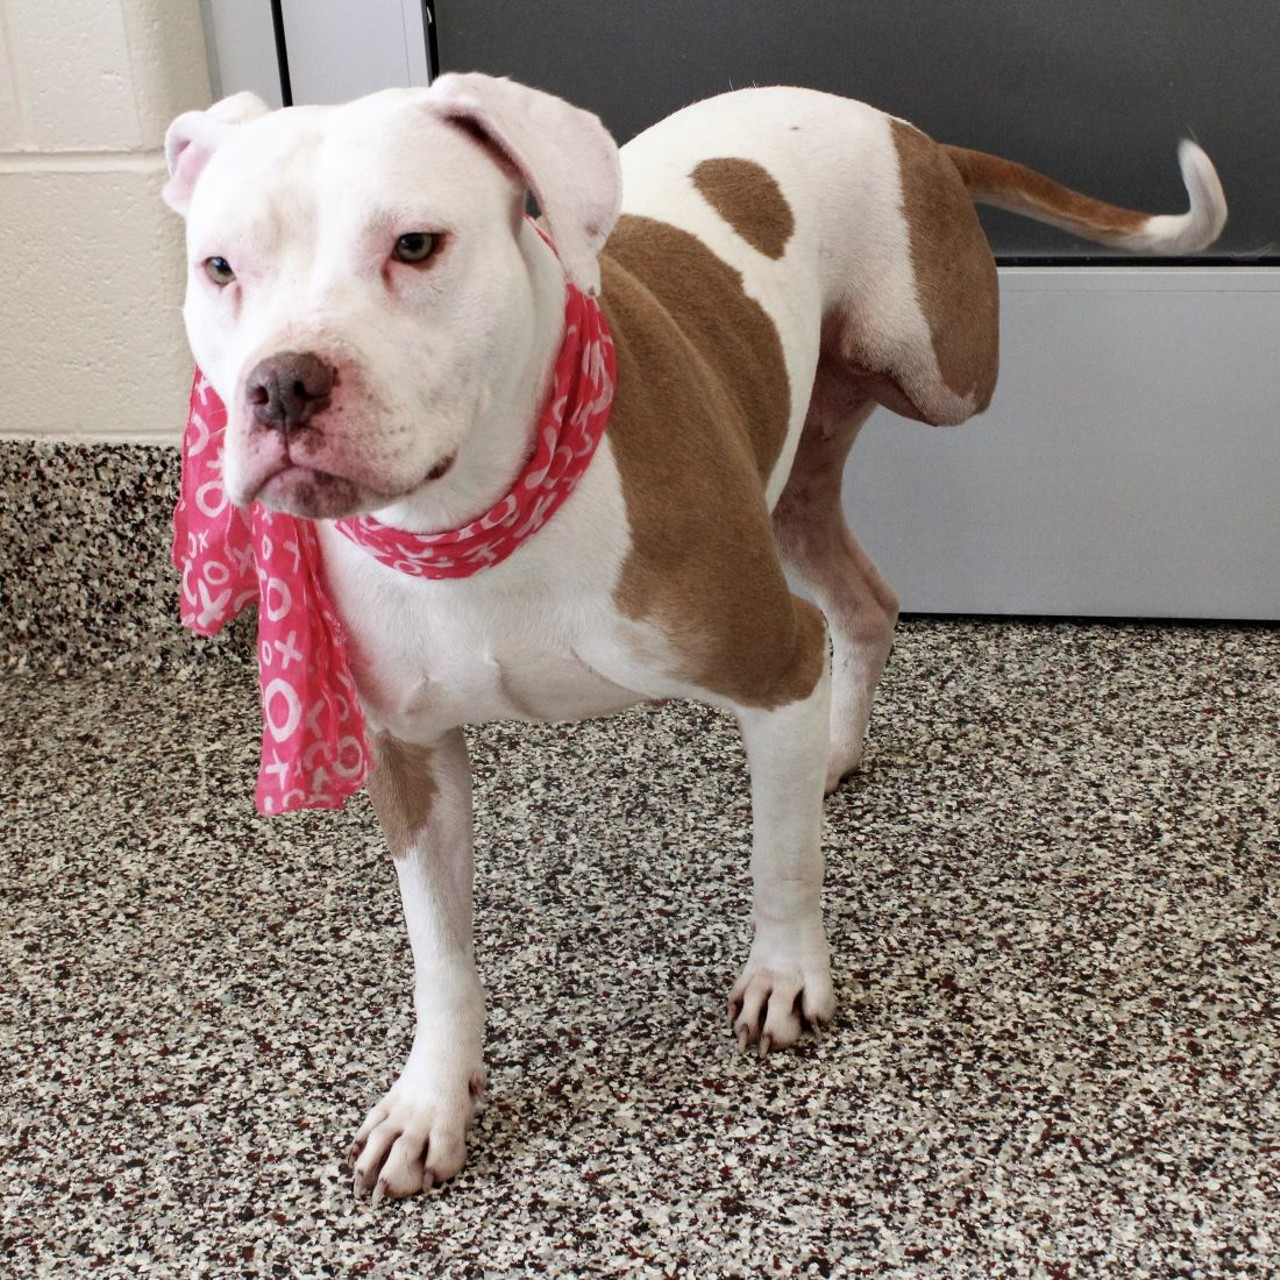 NAME: Lilith
GENDER: Female
BREED: Pit Bull Terrier
AGE: 2 years, 8 months
WEIGHT: 46 pounds
SPECIAL CONSIDERATIONS: None
REASON I CAME TO MHS: Homeless and injured in Detroit
LOCATION: Mackey Center for Animal Care
ID NUMBER: 861808
DETAILS: Click here